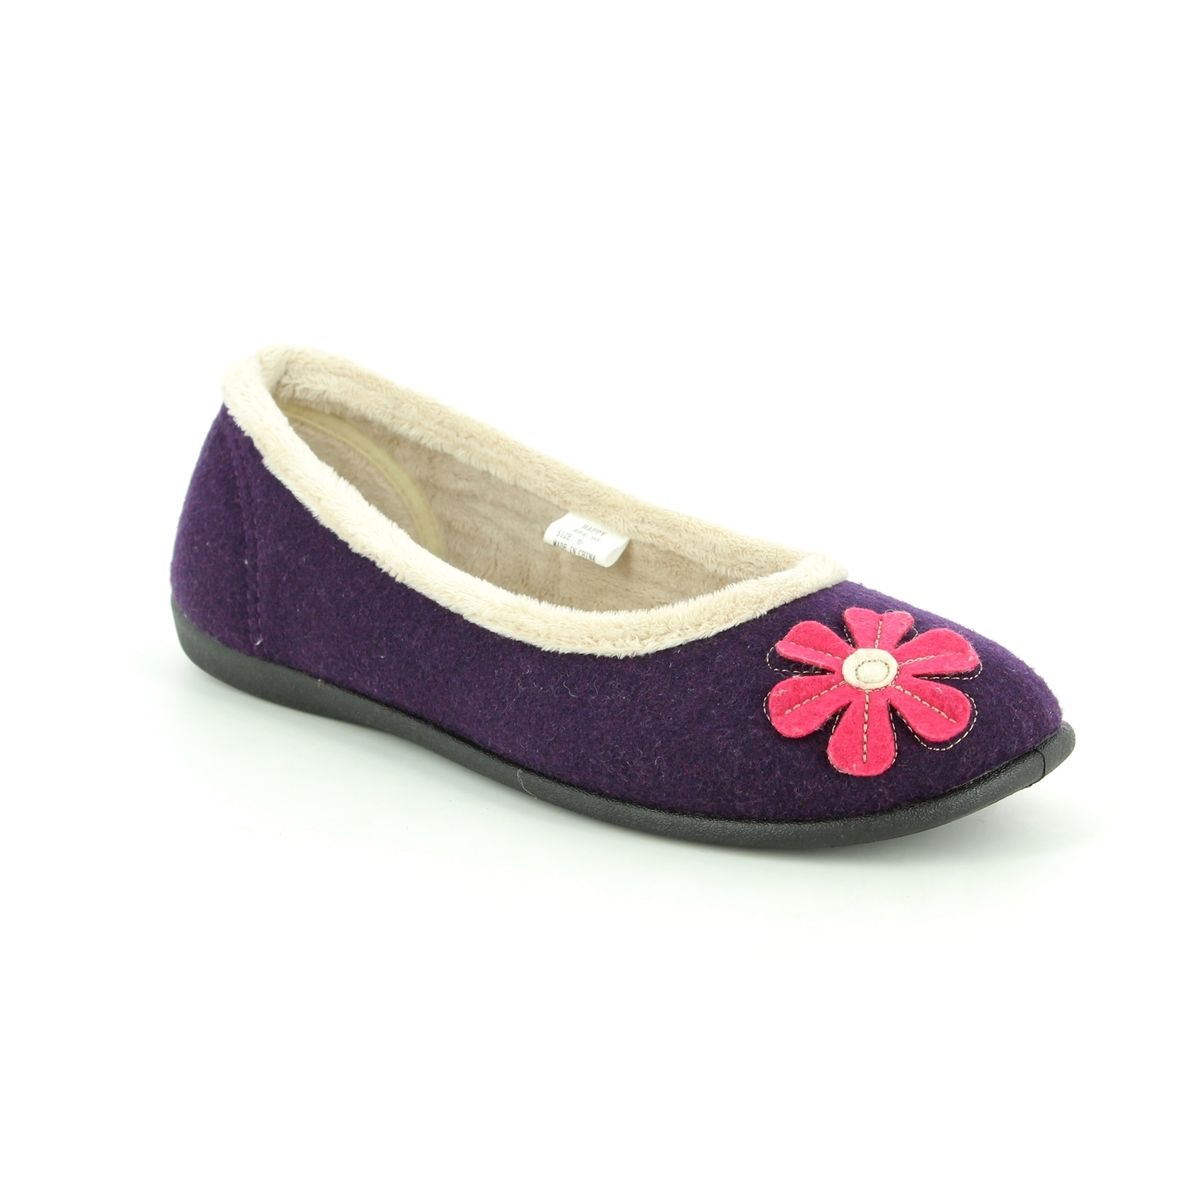 Padders Happy E Fit Purple multi Womens slippers 464-95 in a Plain Microsuede in Size 3